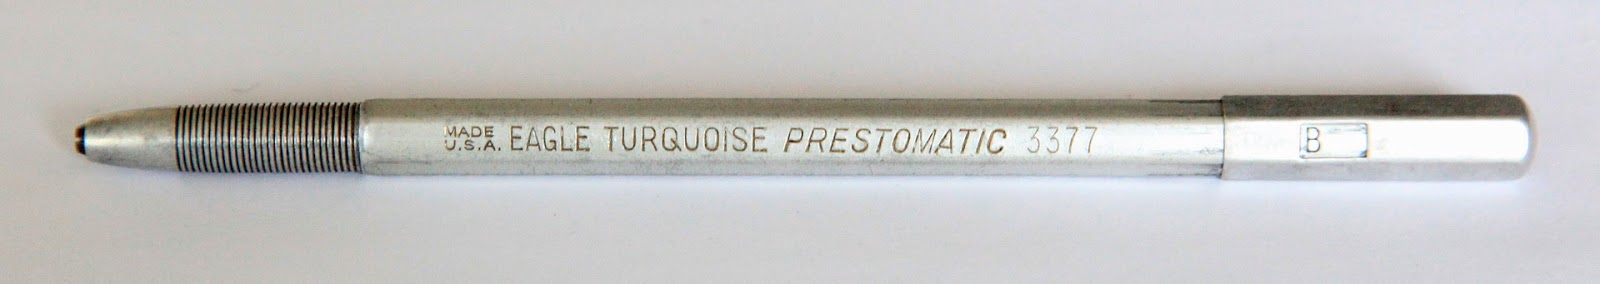 MY MECHANICAL PENCIL MUSEUM: eagle turquoise prestomatic 3377